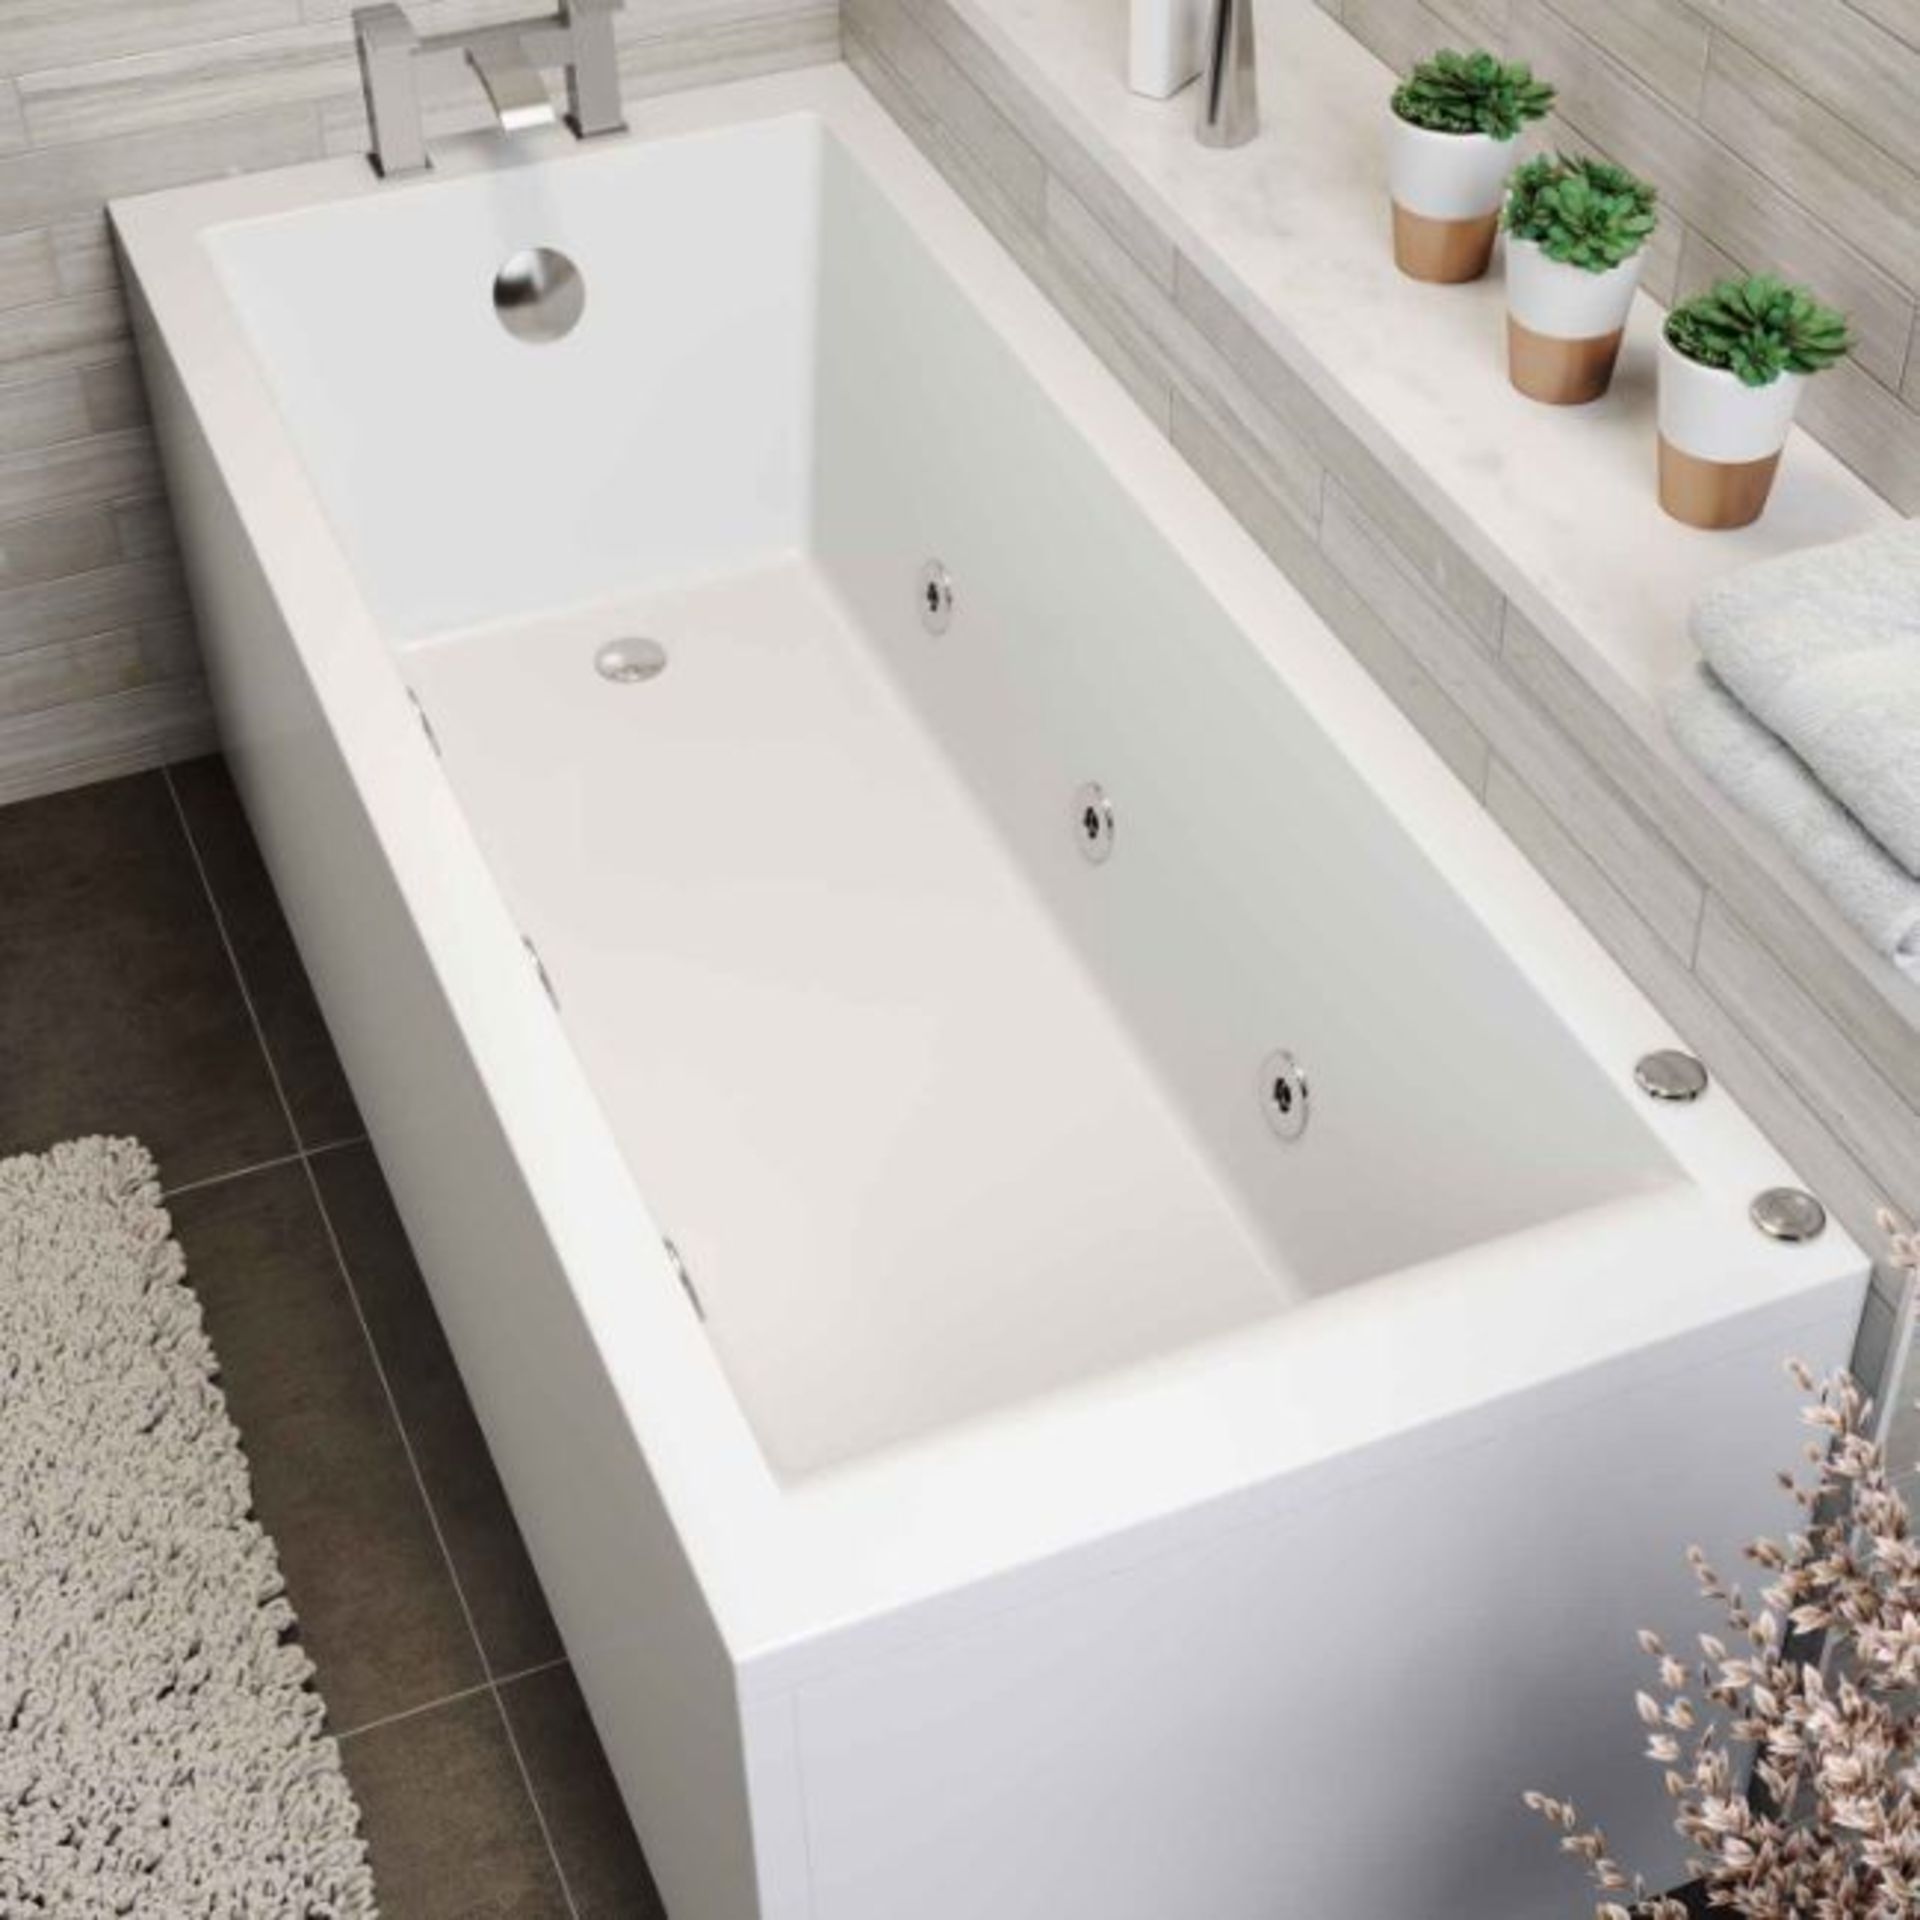 New 1700x700x545mm Whirlpool Jucuzzi Single Ended Bath - 6 Jets. Rrp £1,299.99.Spa Experiance... - Image 2 of 3